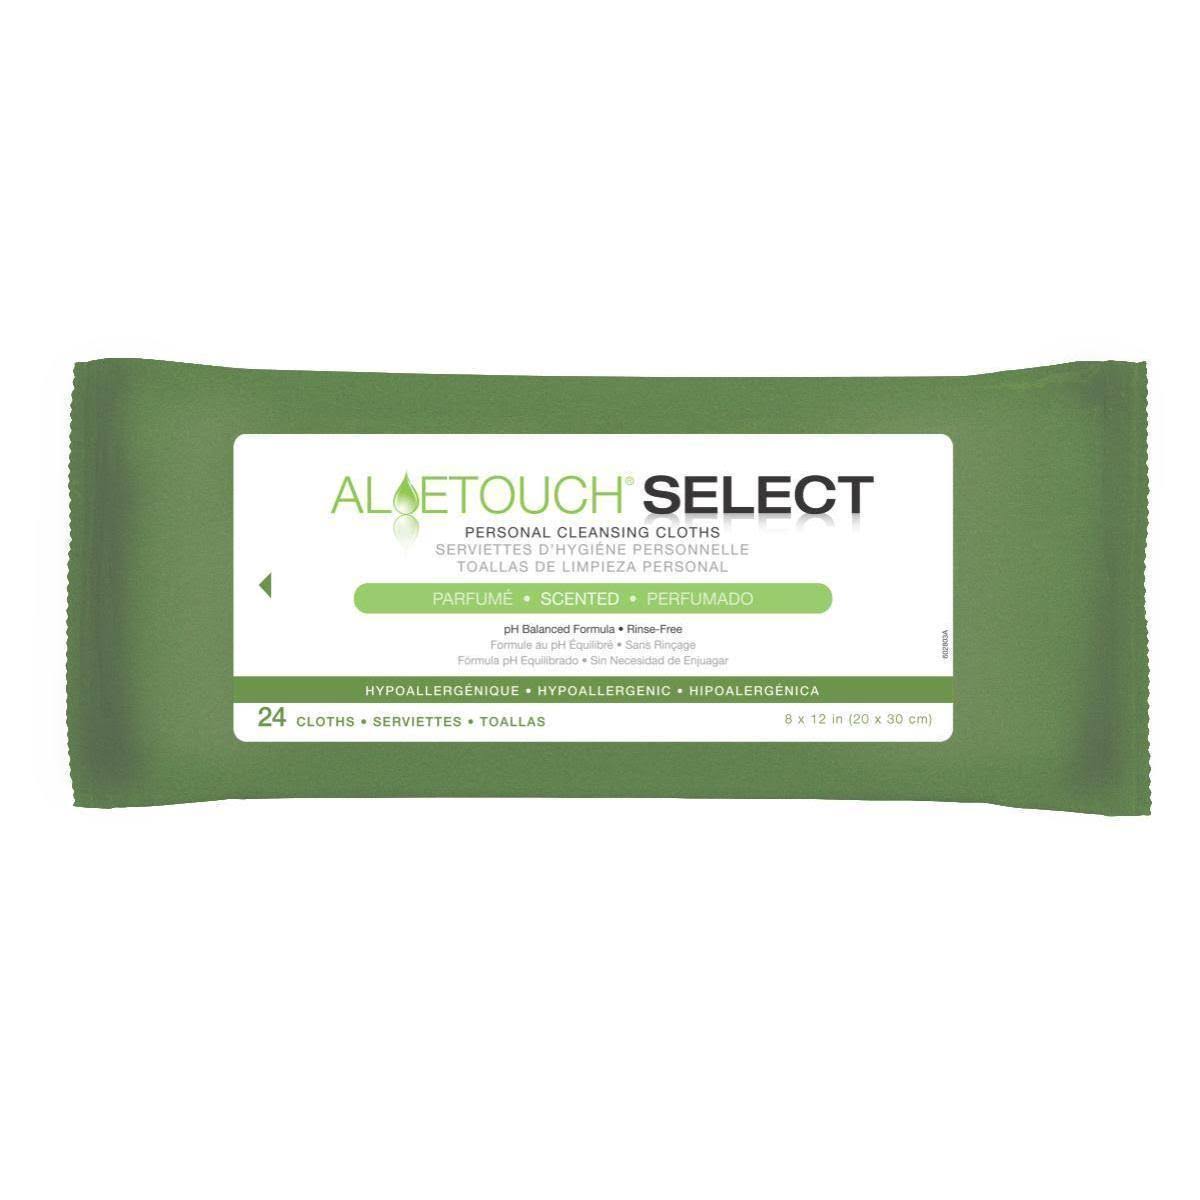 Aloetouch Select Premium Spunlace Personal Cleansing Wipes - 24 pack